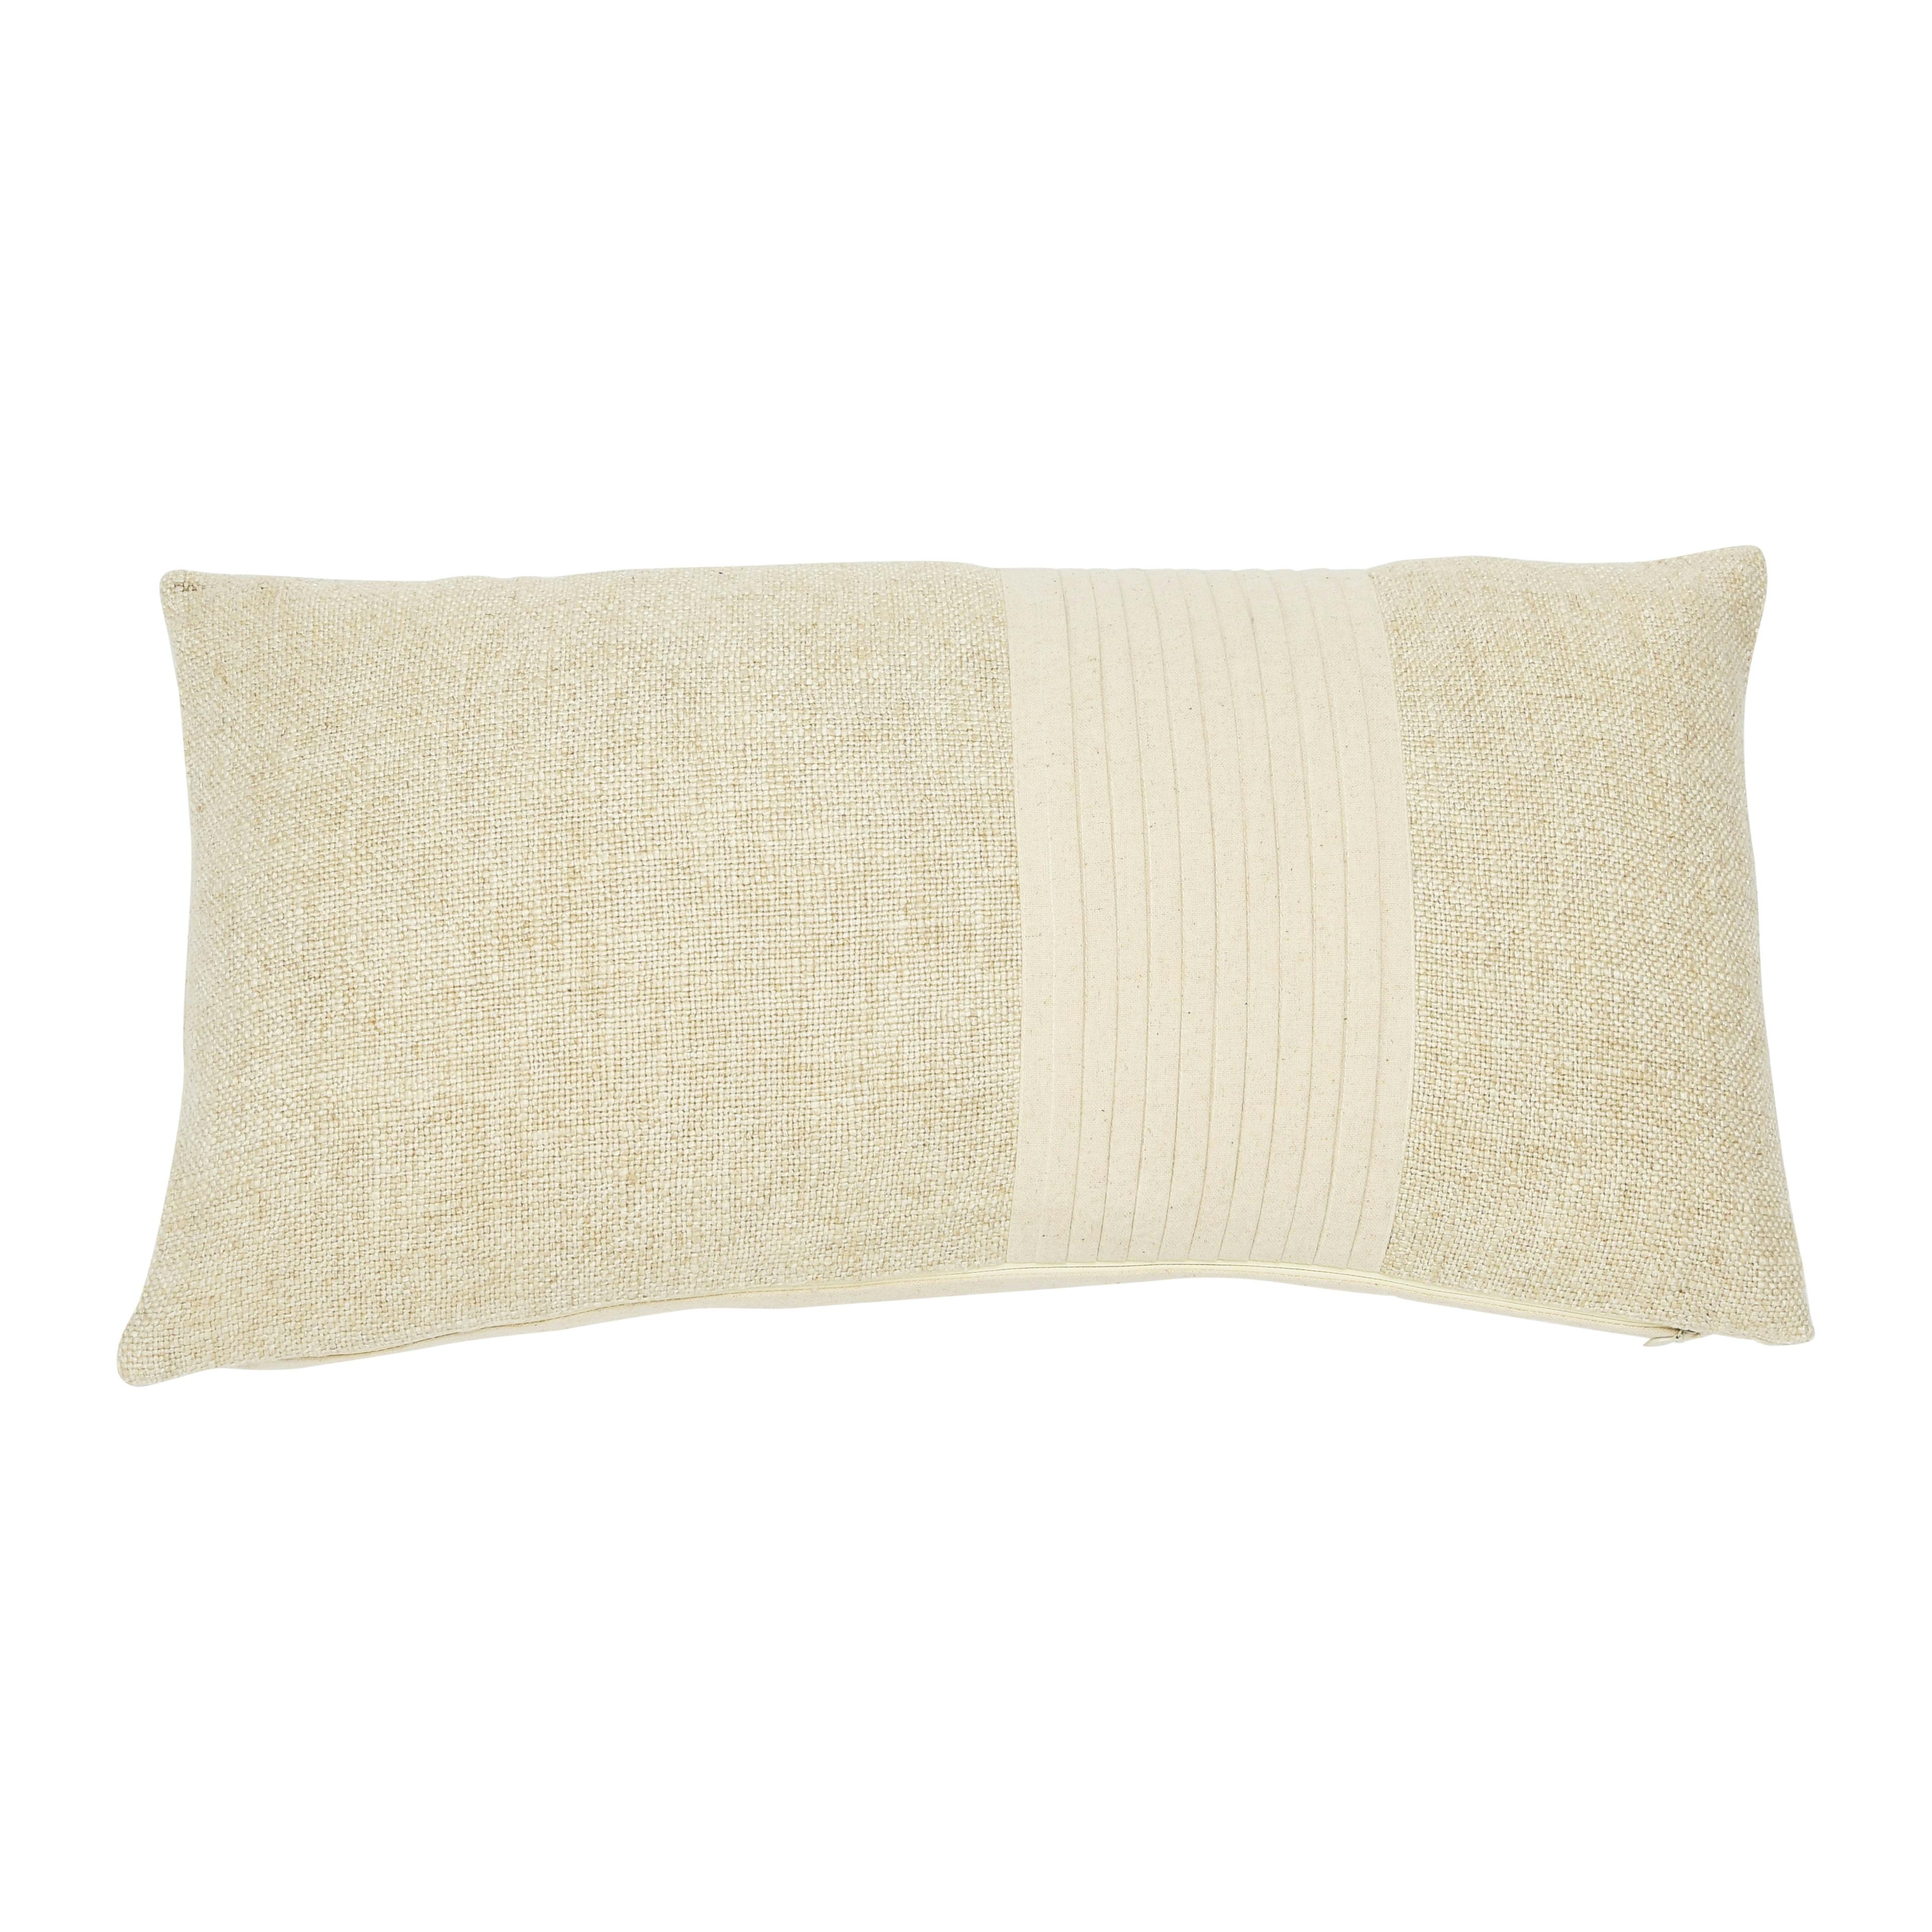 Sophisticated Pleated Linen 24" Lumbar Pillow in Neutral Tones